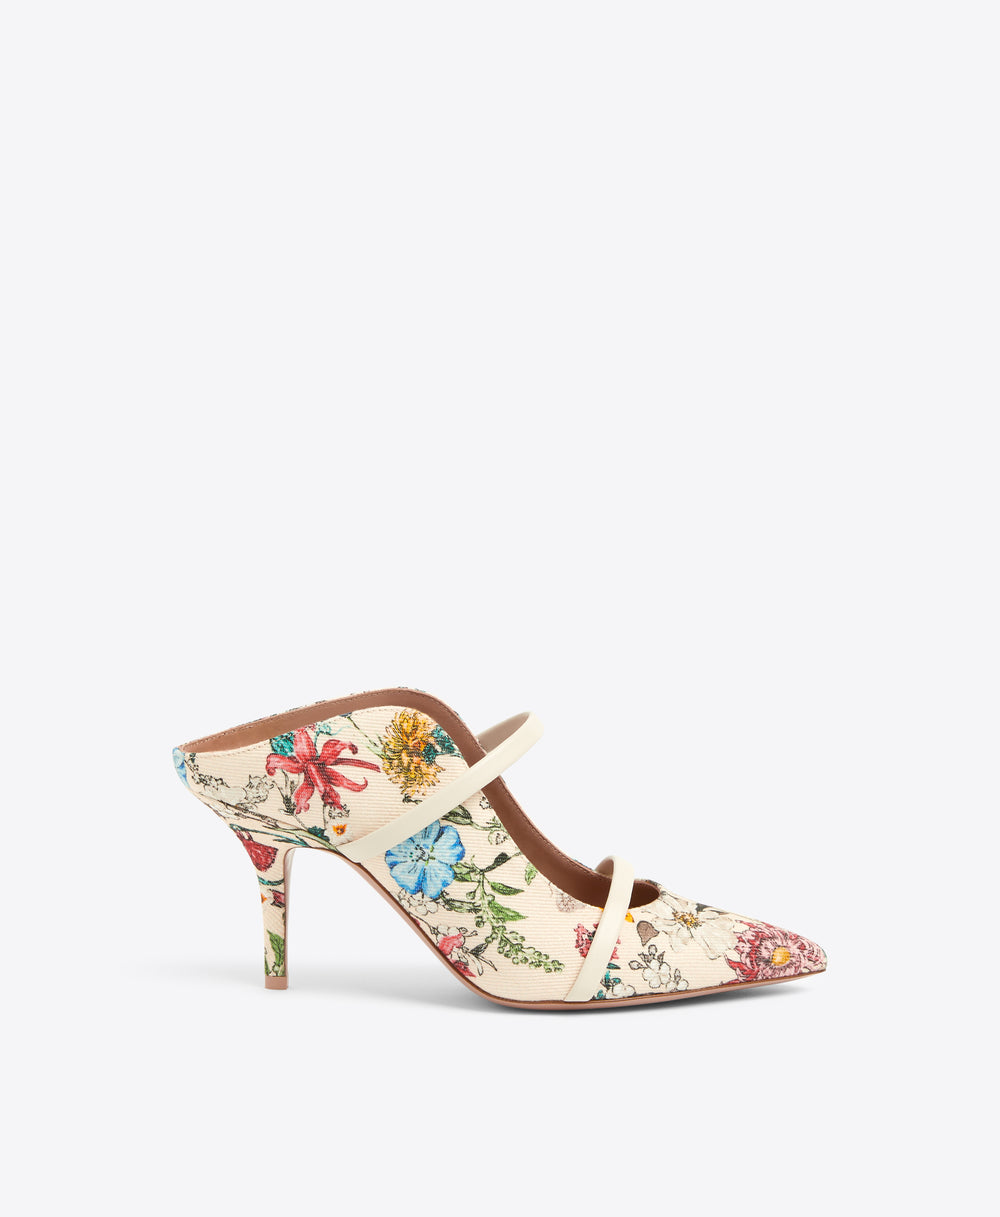 Maureen 70 Floral Cream Canvas Heeled Mules Malone Souliers